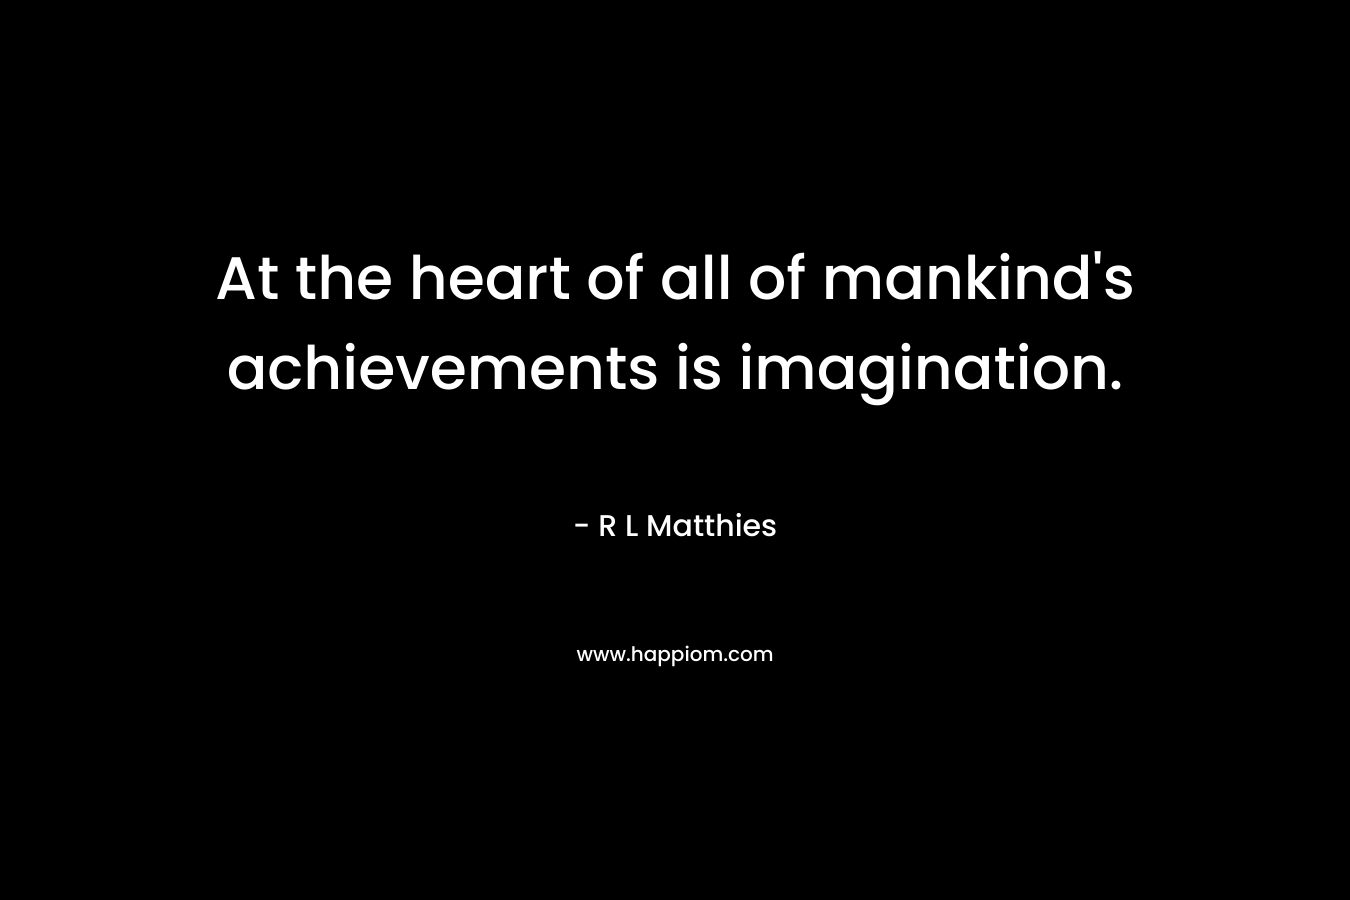 At the heart of all of mankind’s achievements is imagination. – R L Matthies